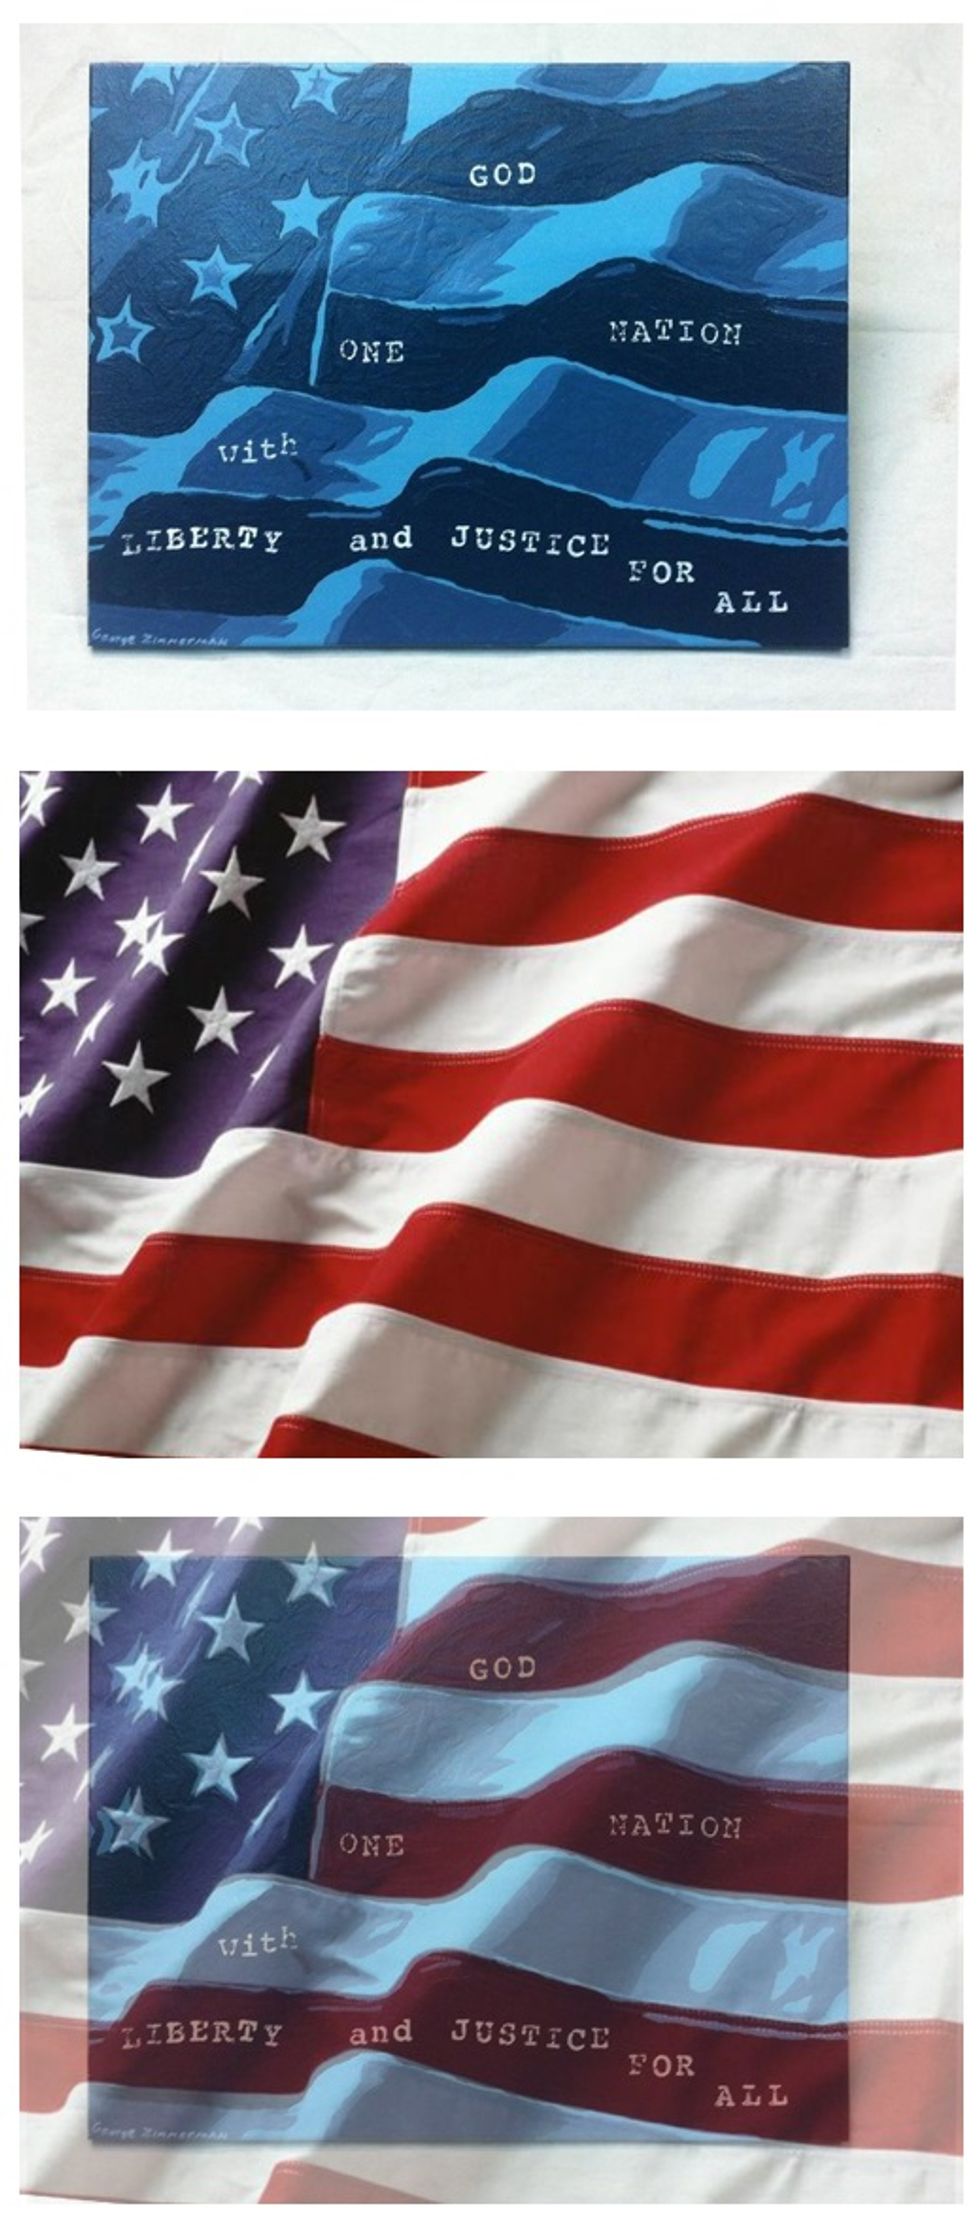 Surprise, Surprise, Surprise: George Zimmerman Stoled His Inspirational Flag 'Painting' From A Stock Image